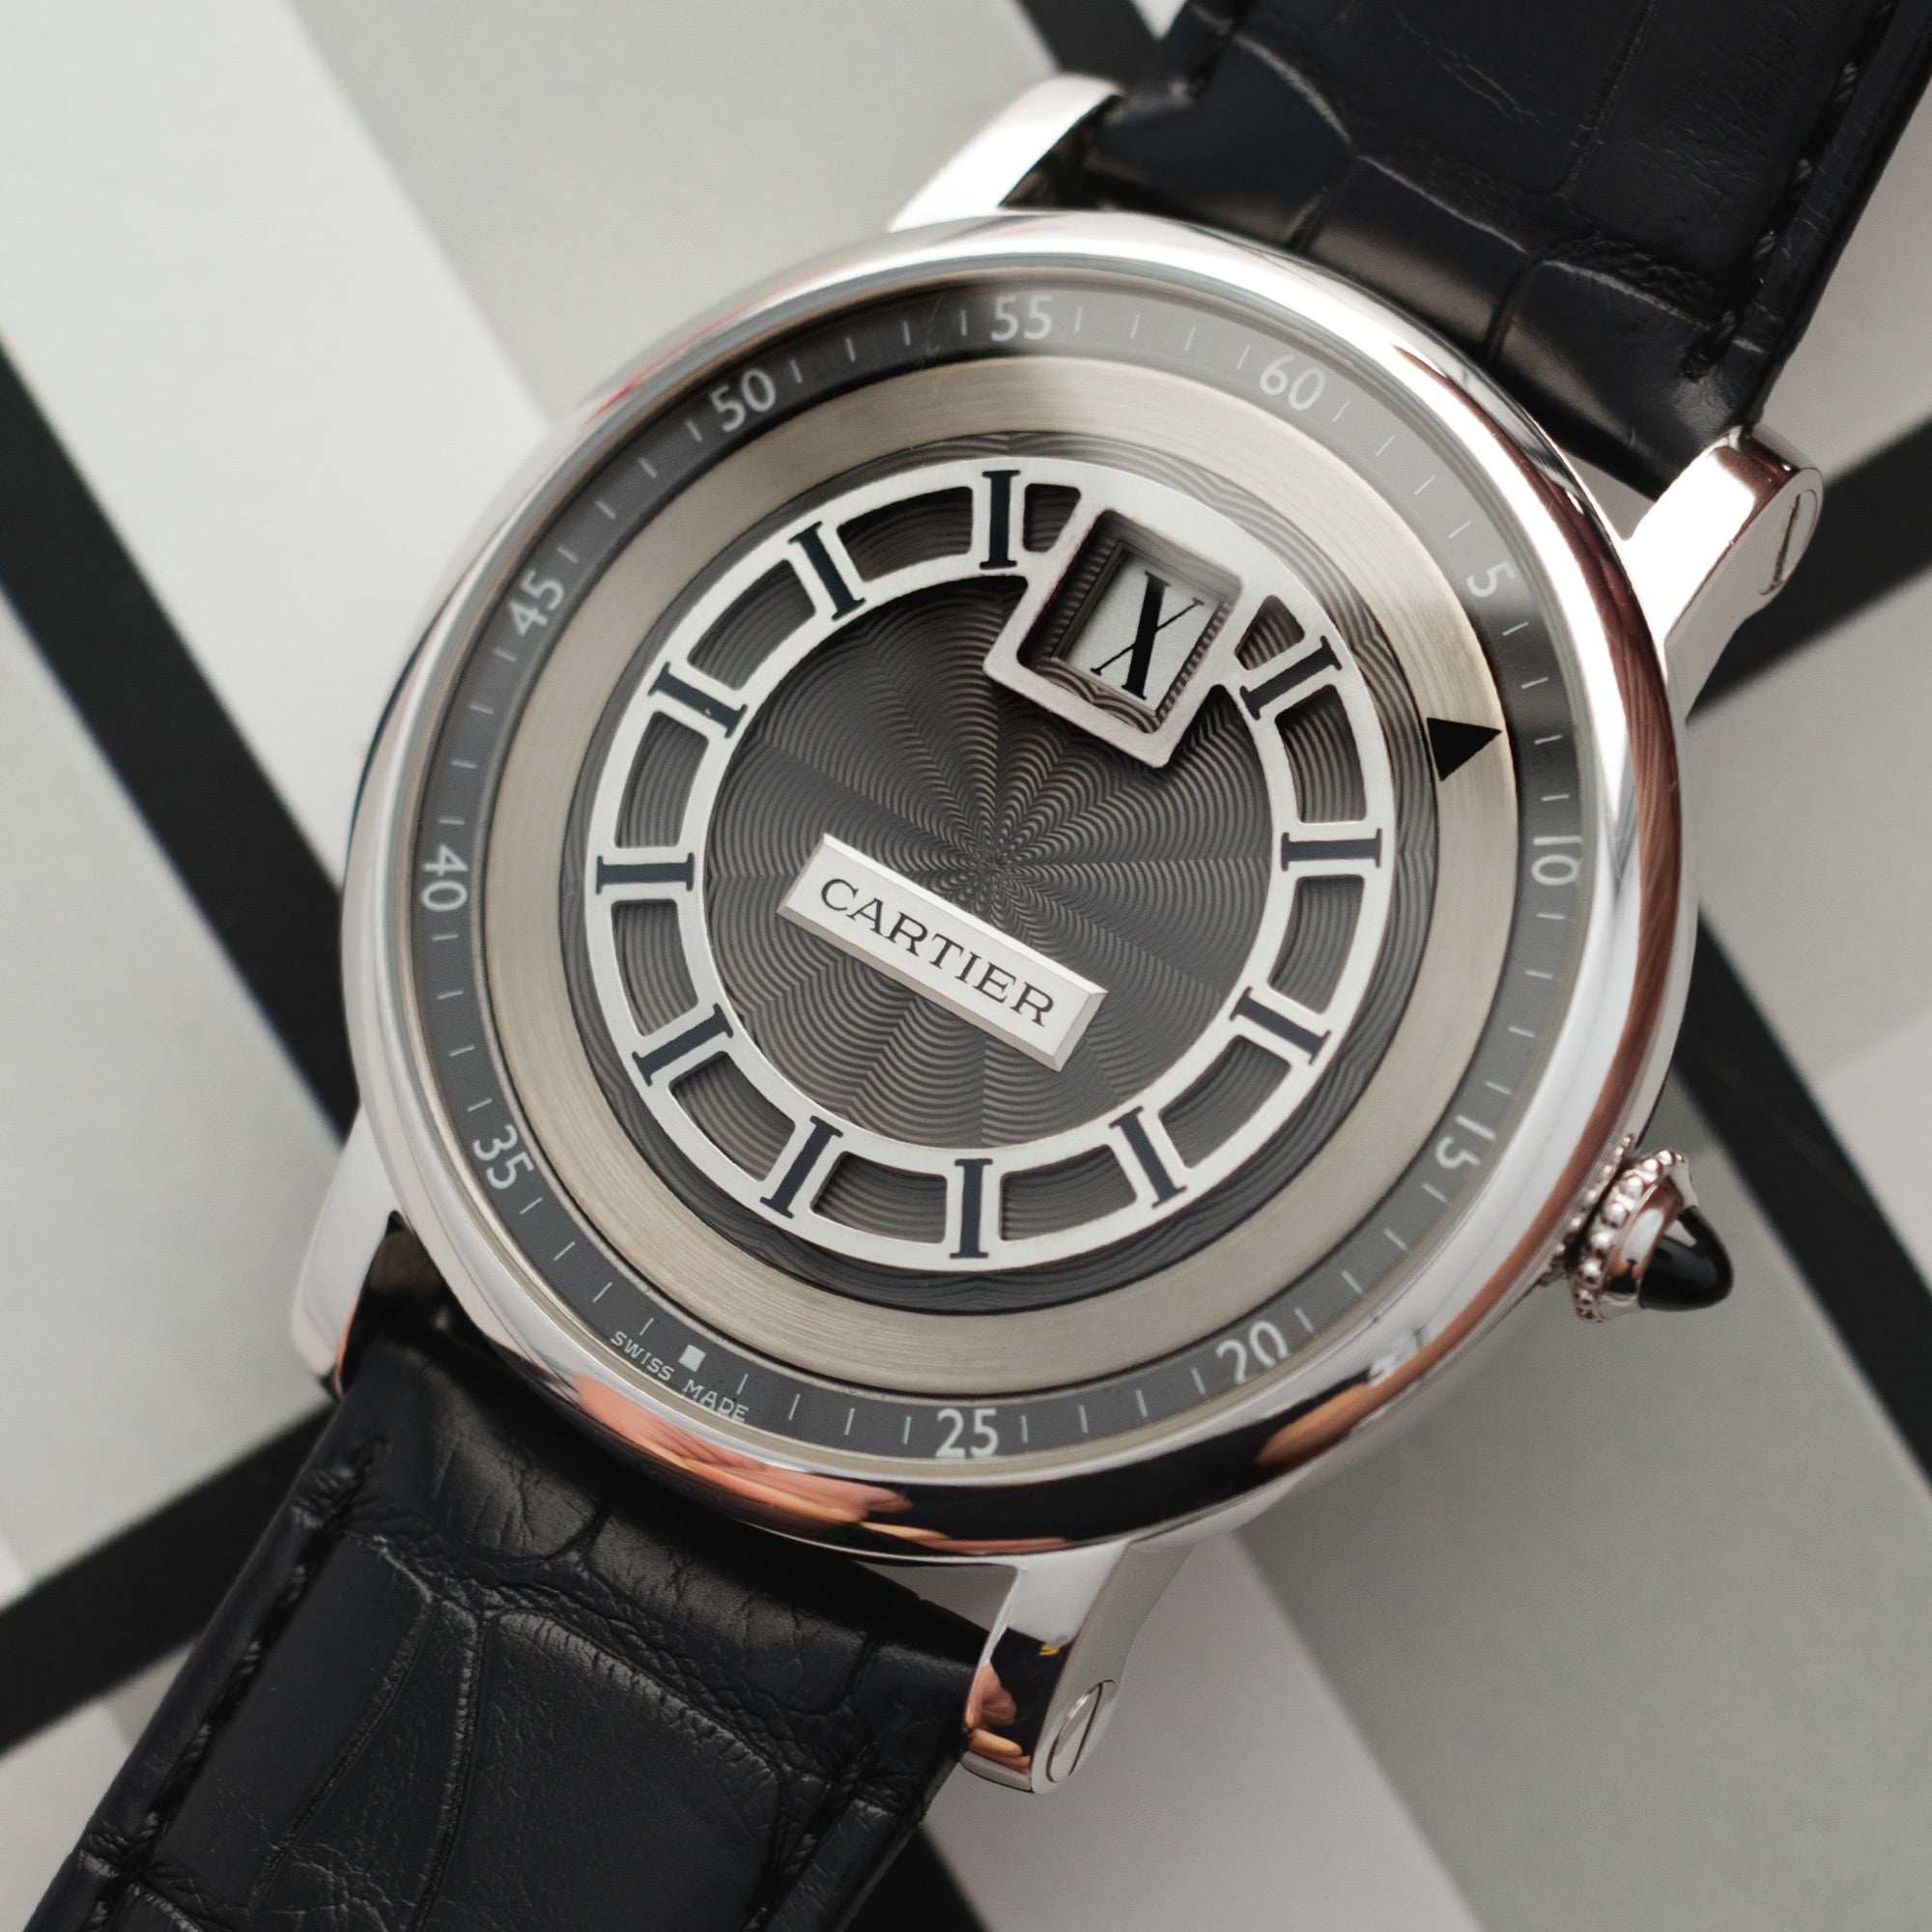 Cartier - Cartier White Gold Rotonde Jumping Hour Ref. W1553851 - The Keystone Watches